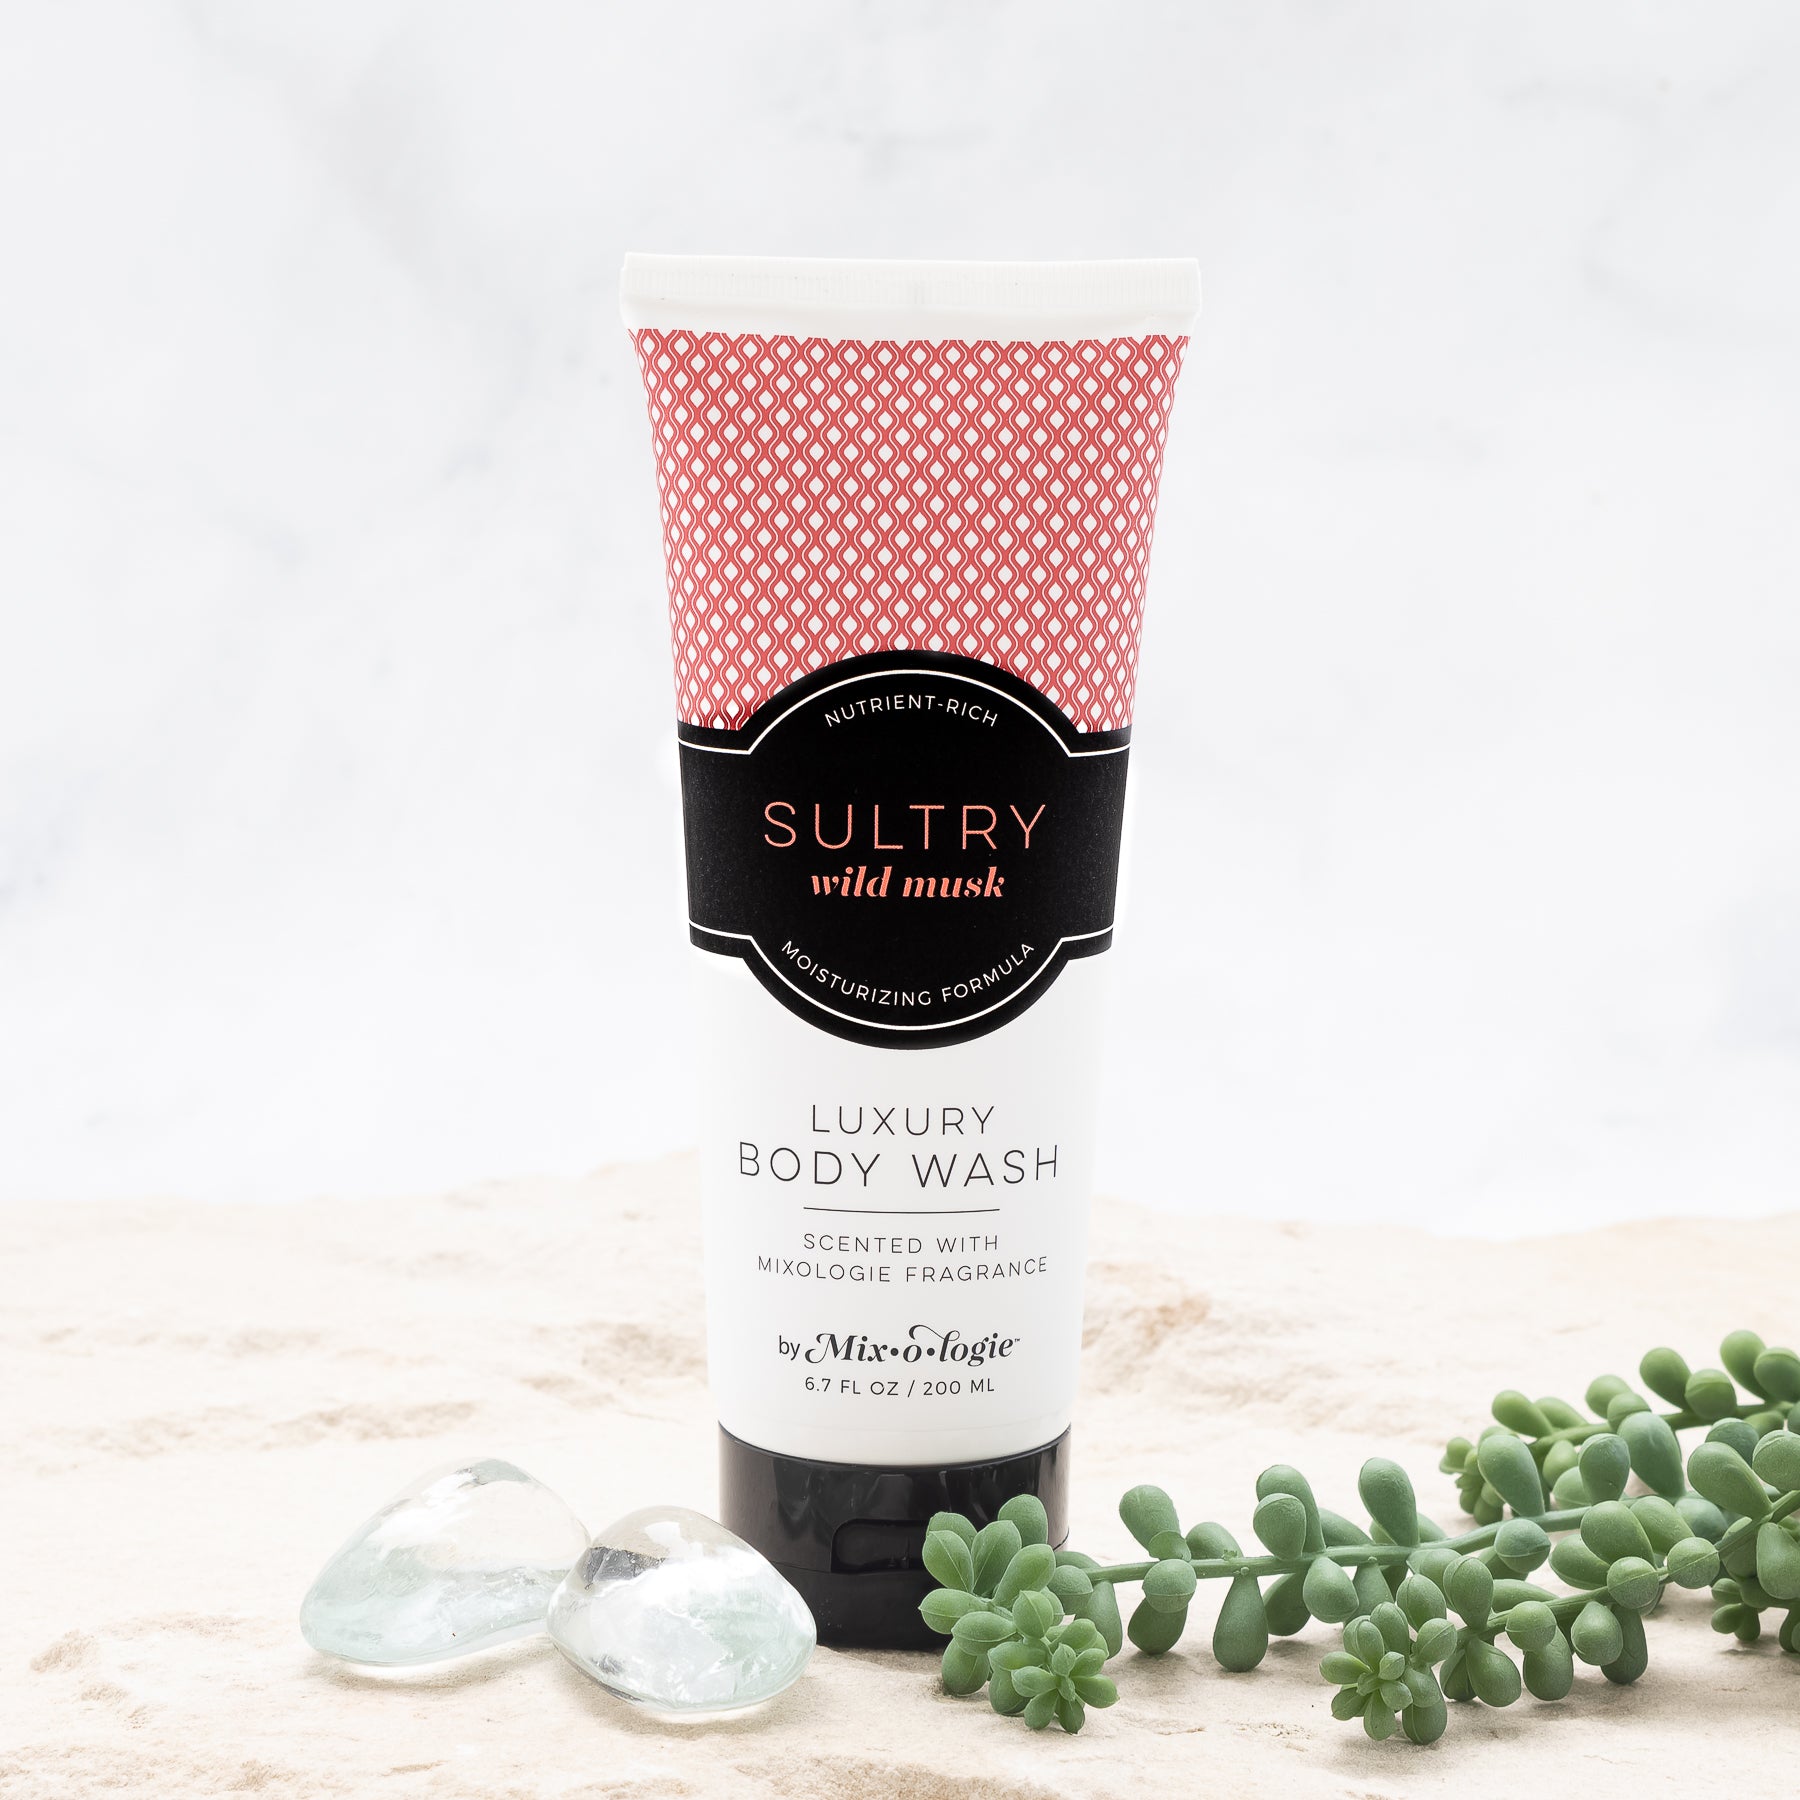 Luxury Body Wash in Mixologie’s Sultry (Wild Musk) in red color sample package with black label. Contains 6.7 fl oz or 200 mL pictured in sand with rocks and greenery.